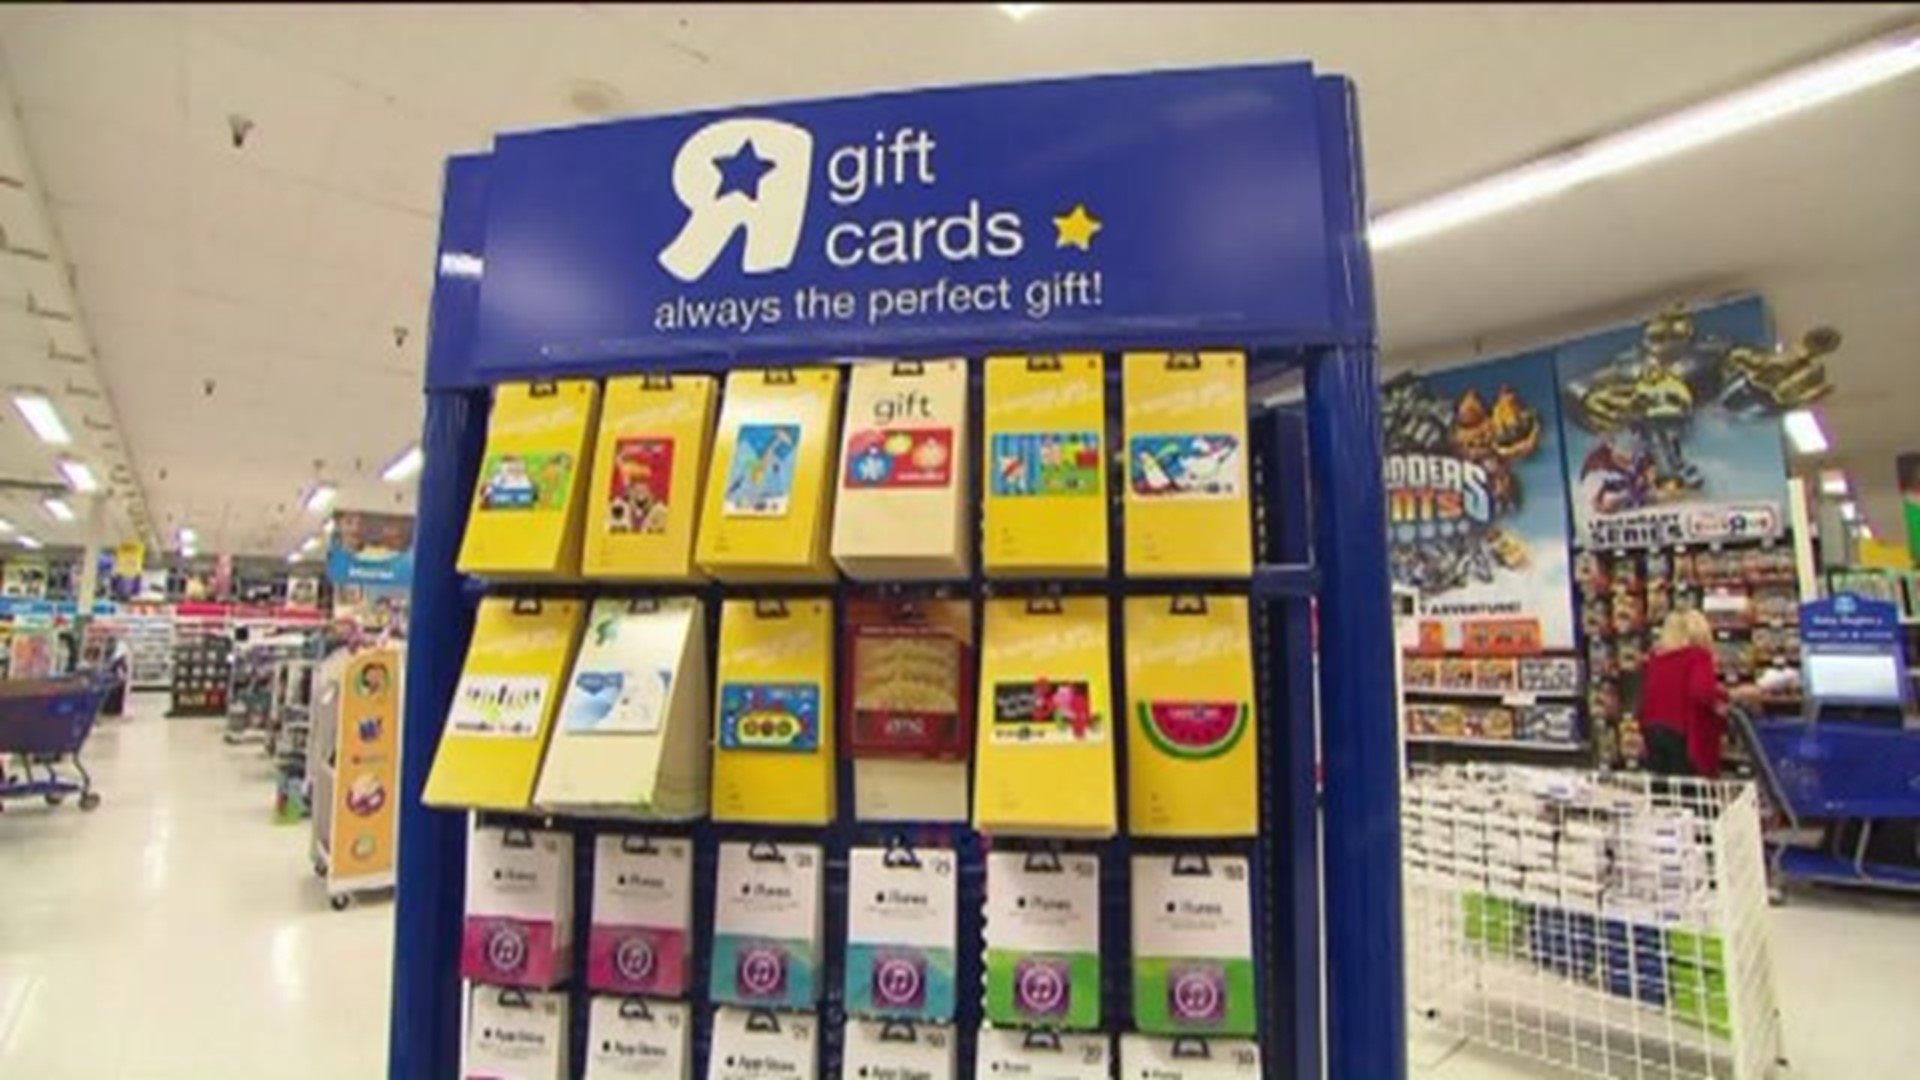 The Secret in Gift Cards